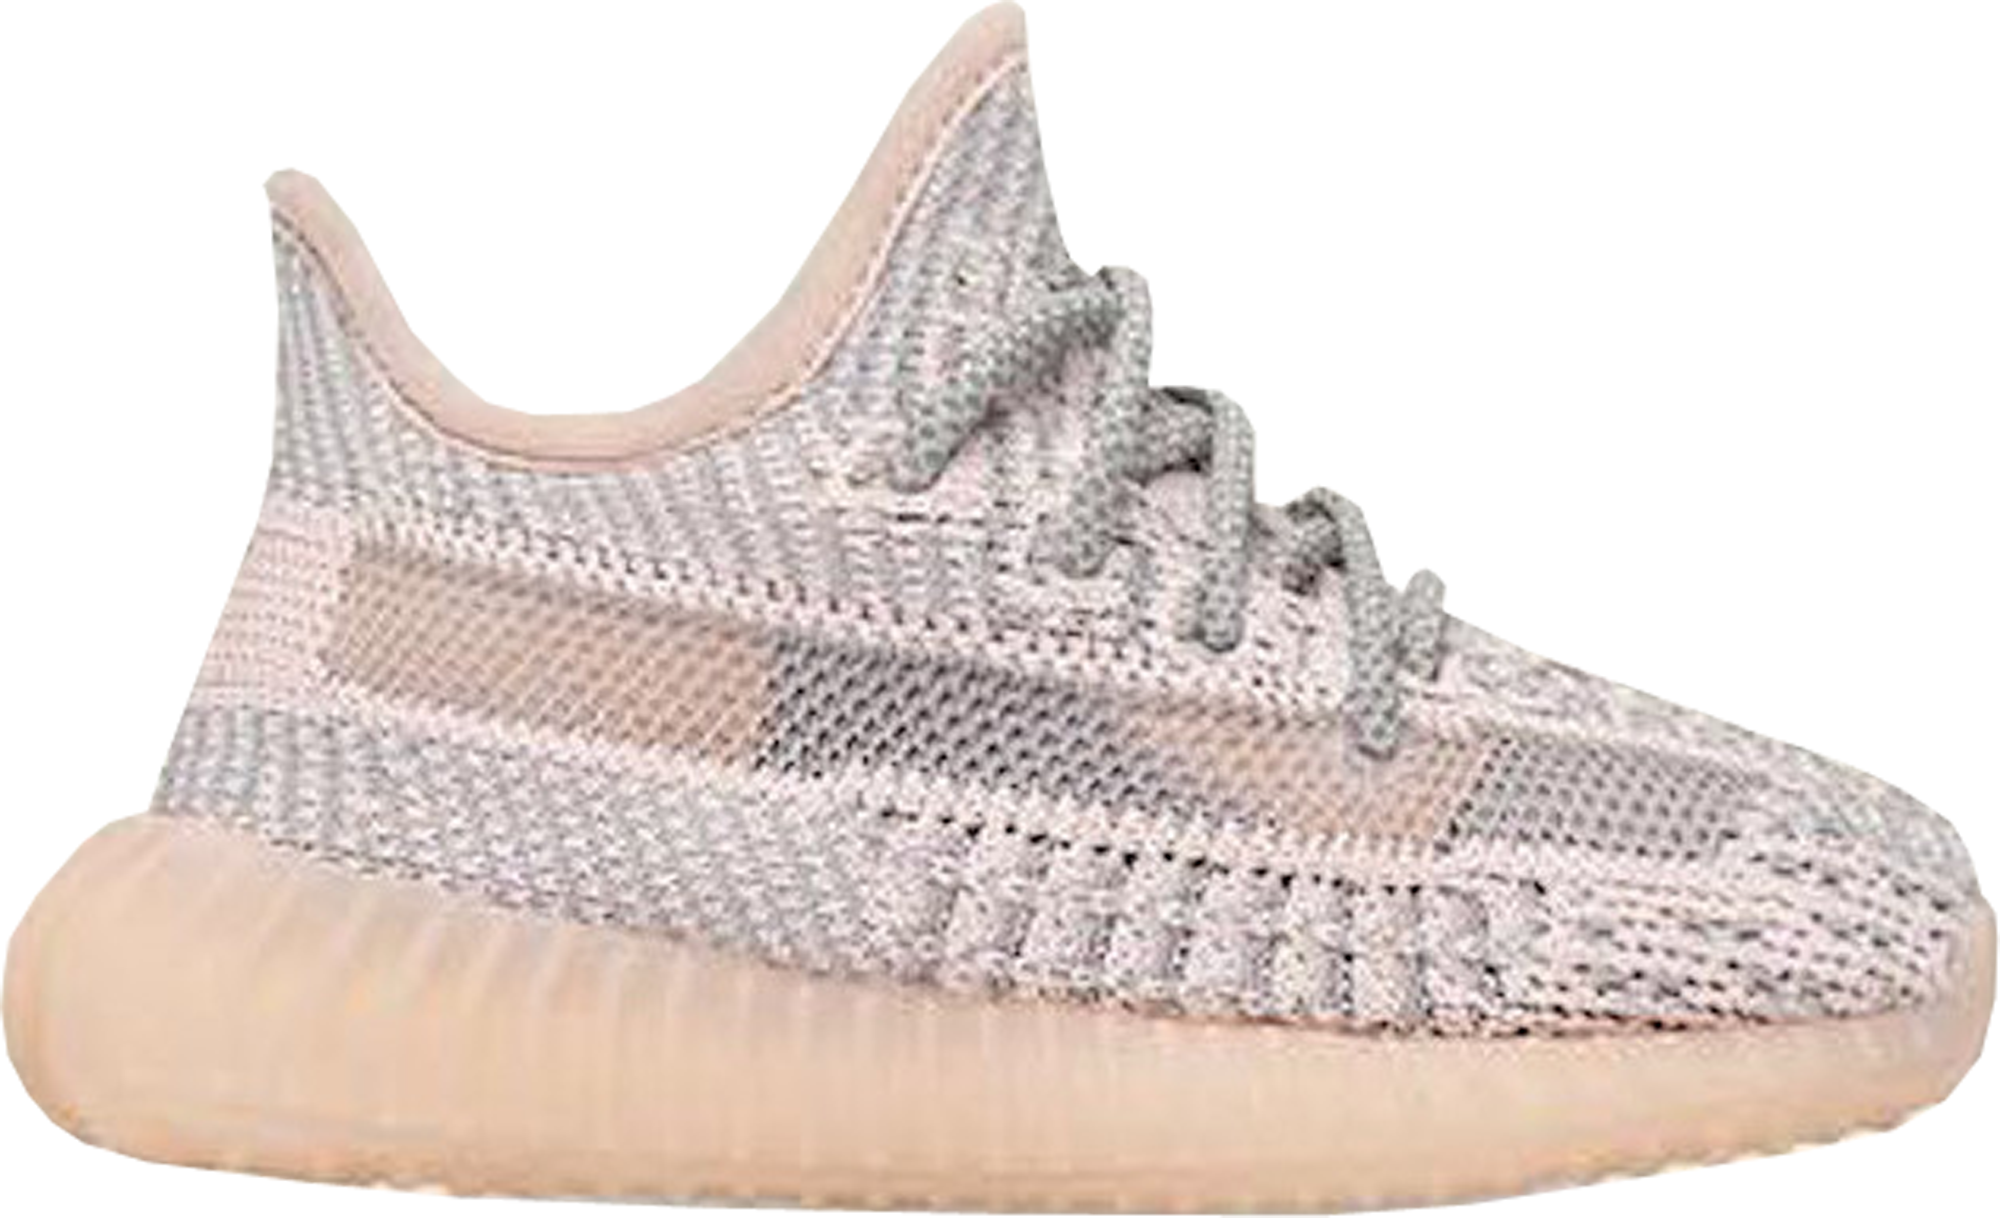 yeezy 350 boost synth